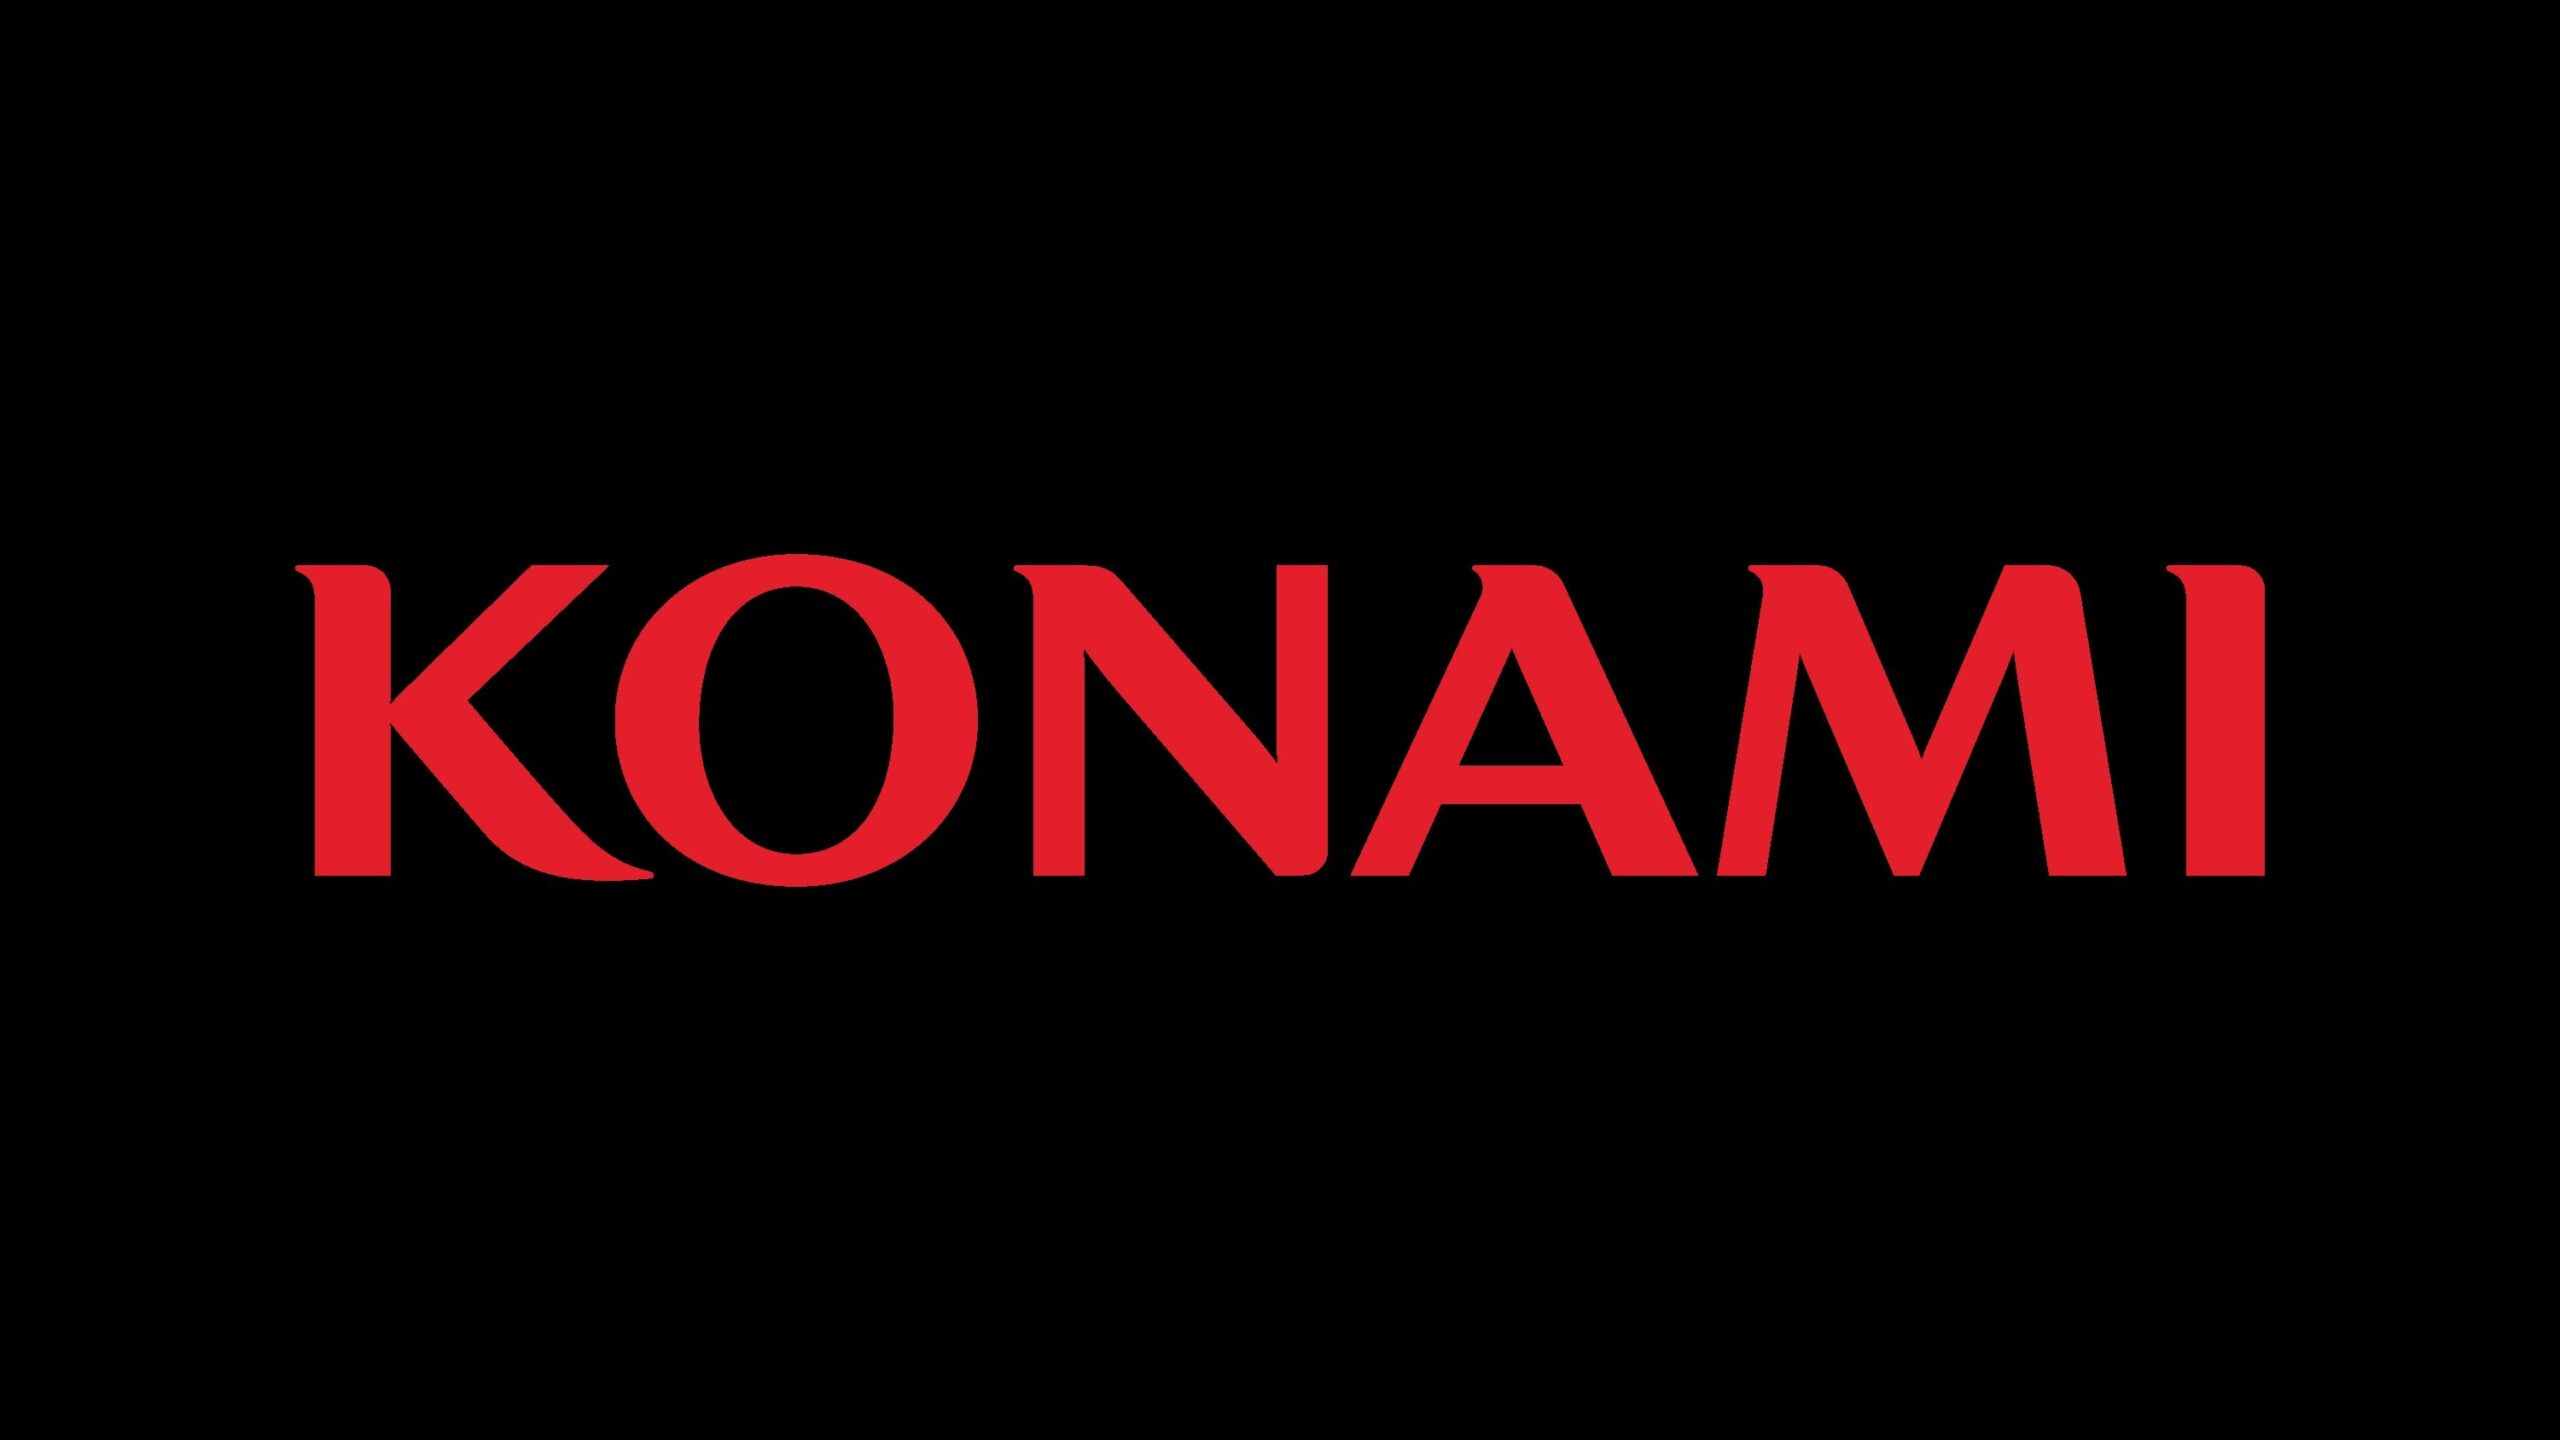 Former Konami employee arrested for attempting to kill his boss